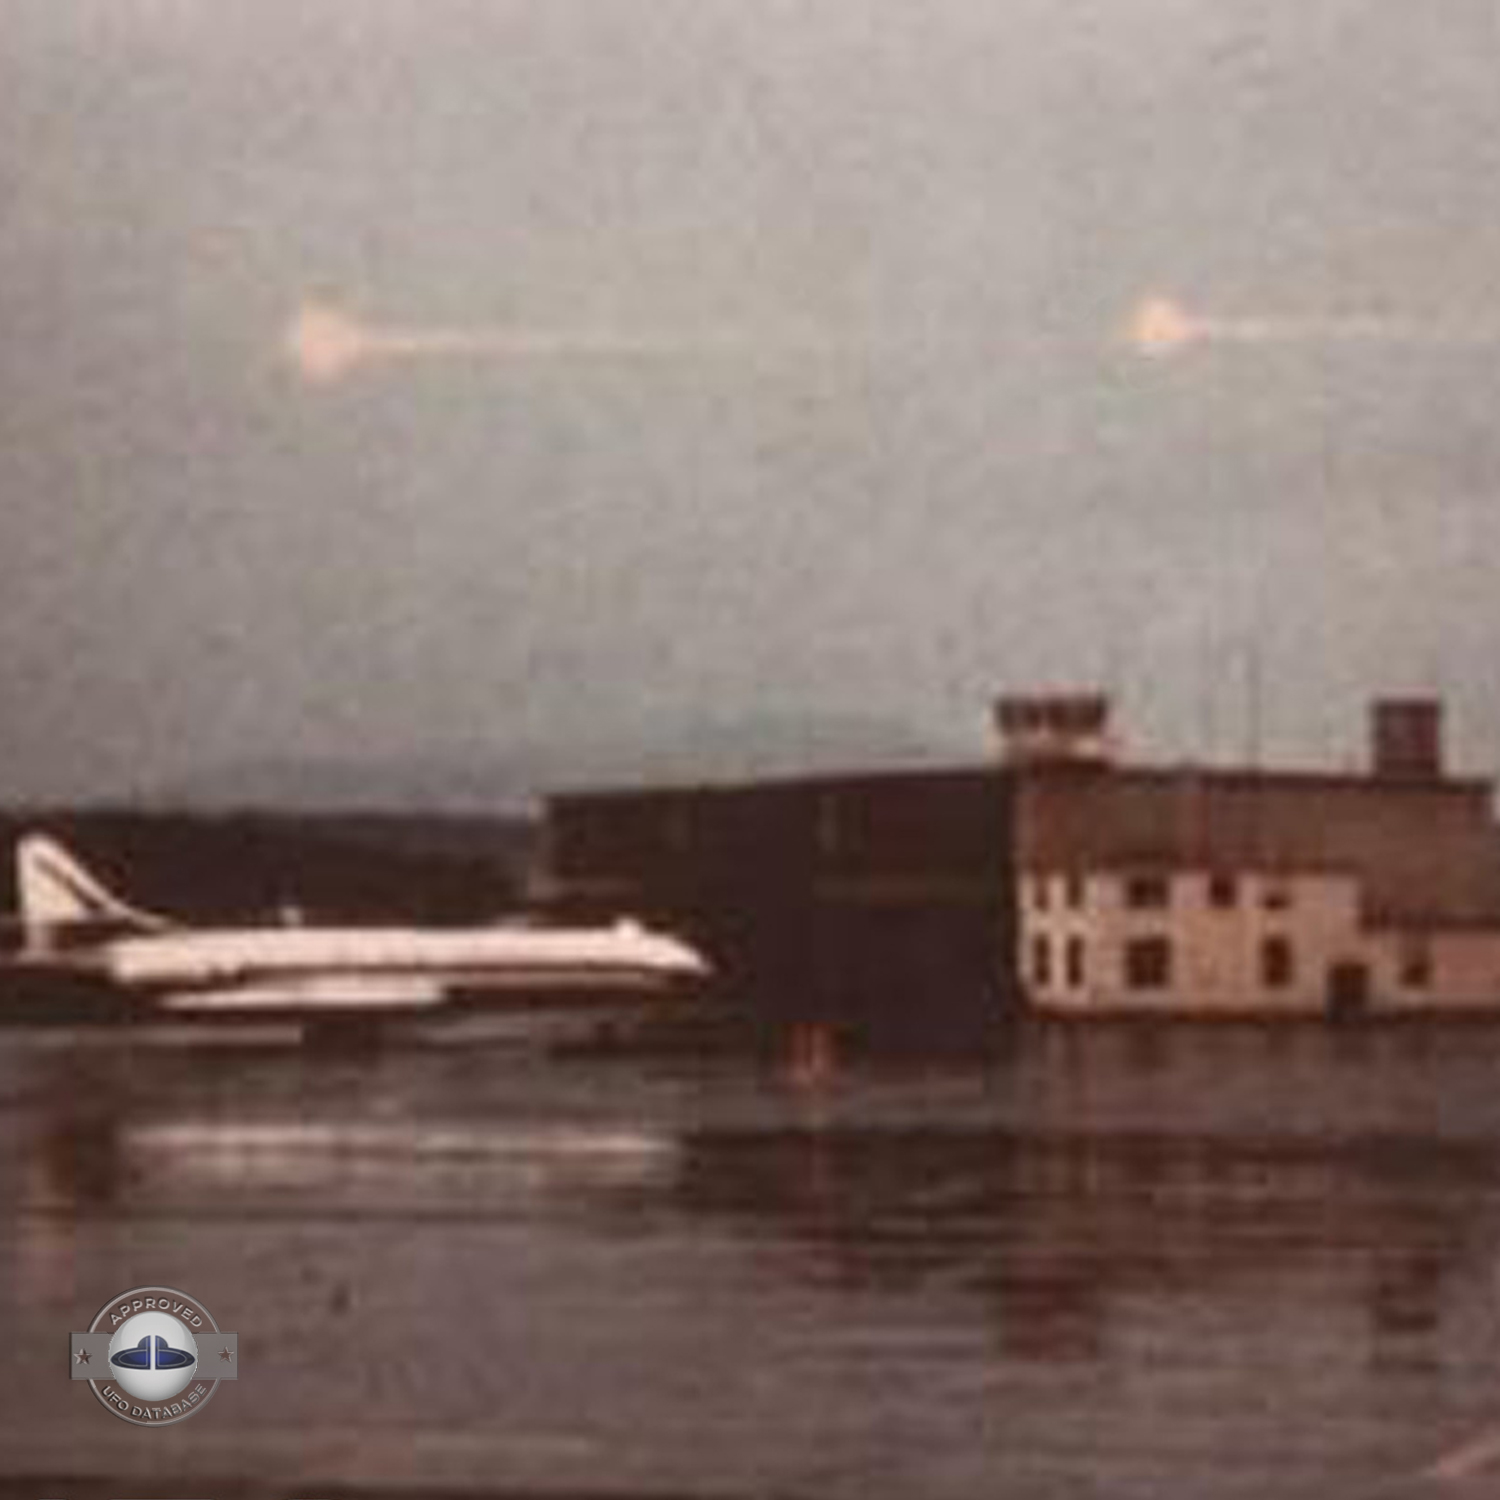 2 light red spheres over control tower of the Zurich-Kloten Airport UFO Picture #140-3